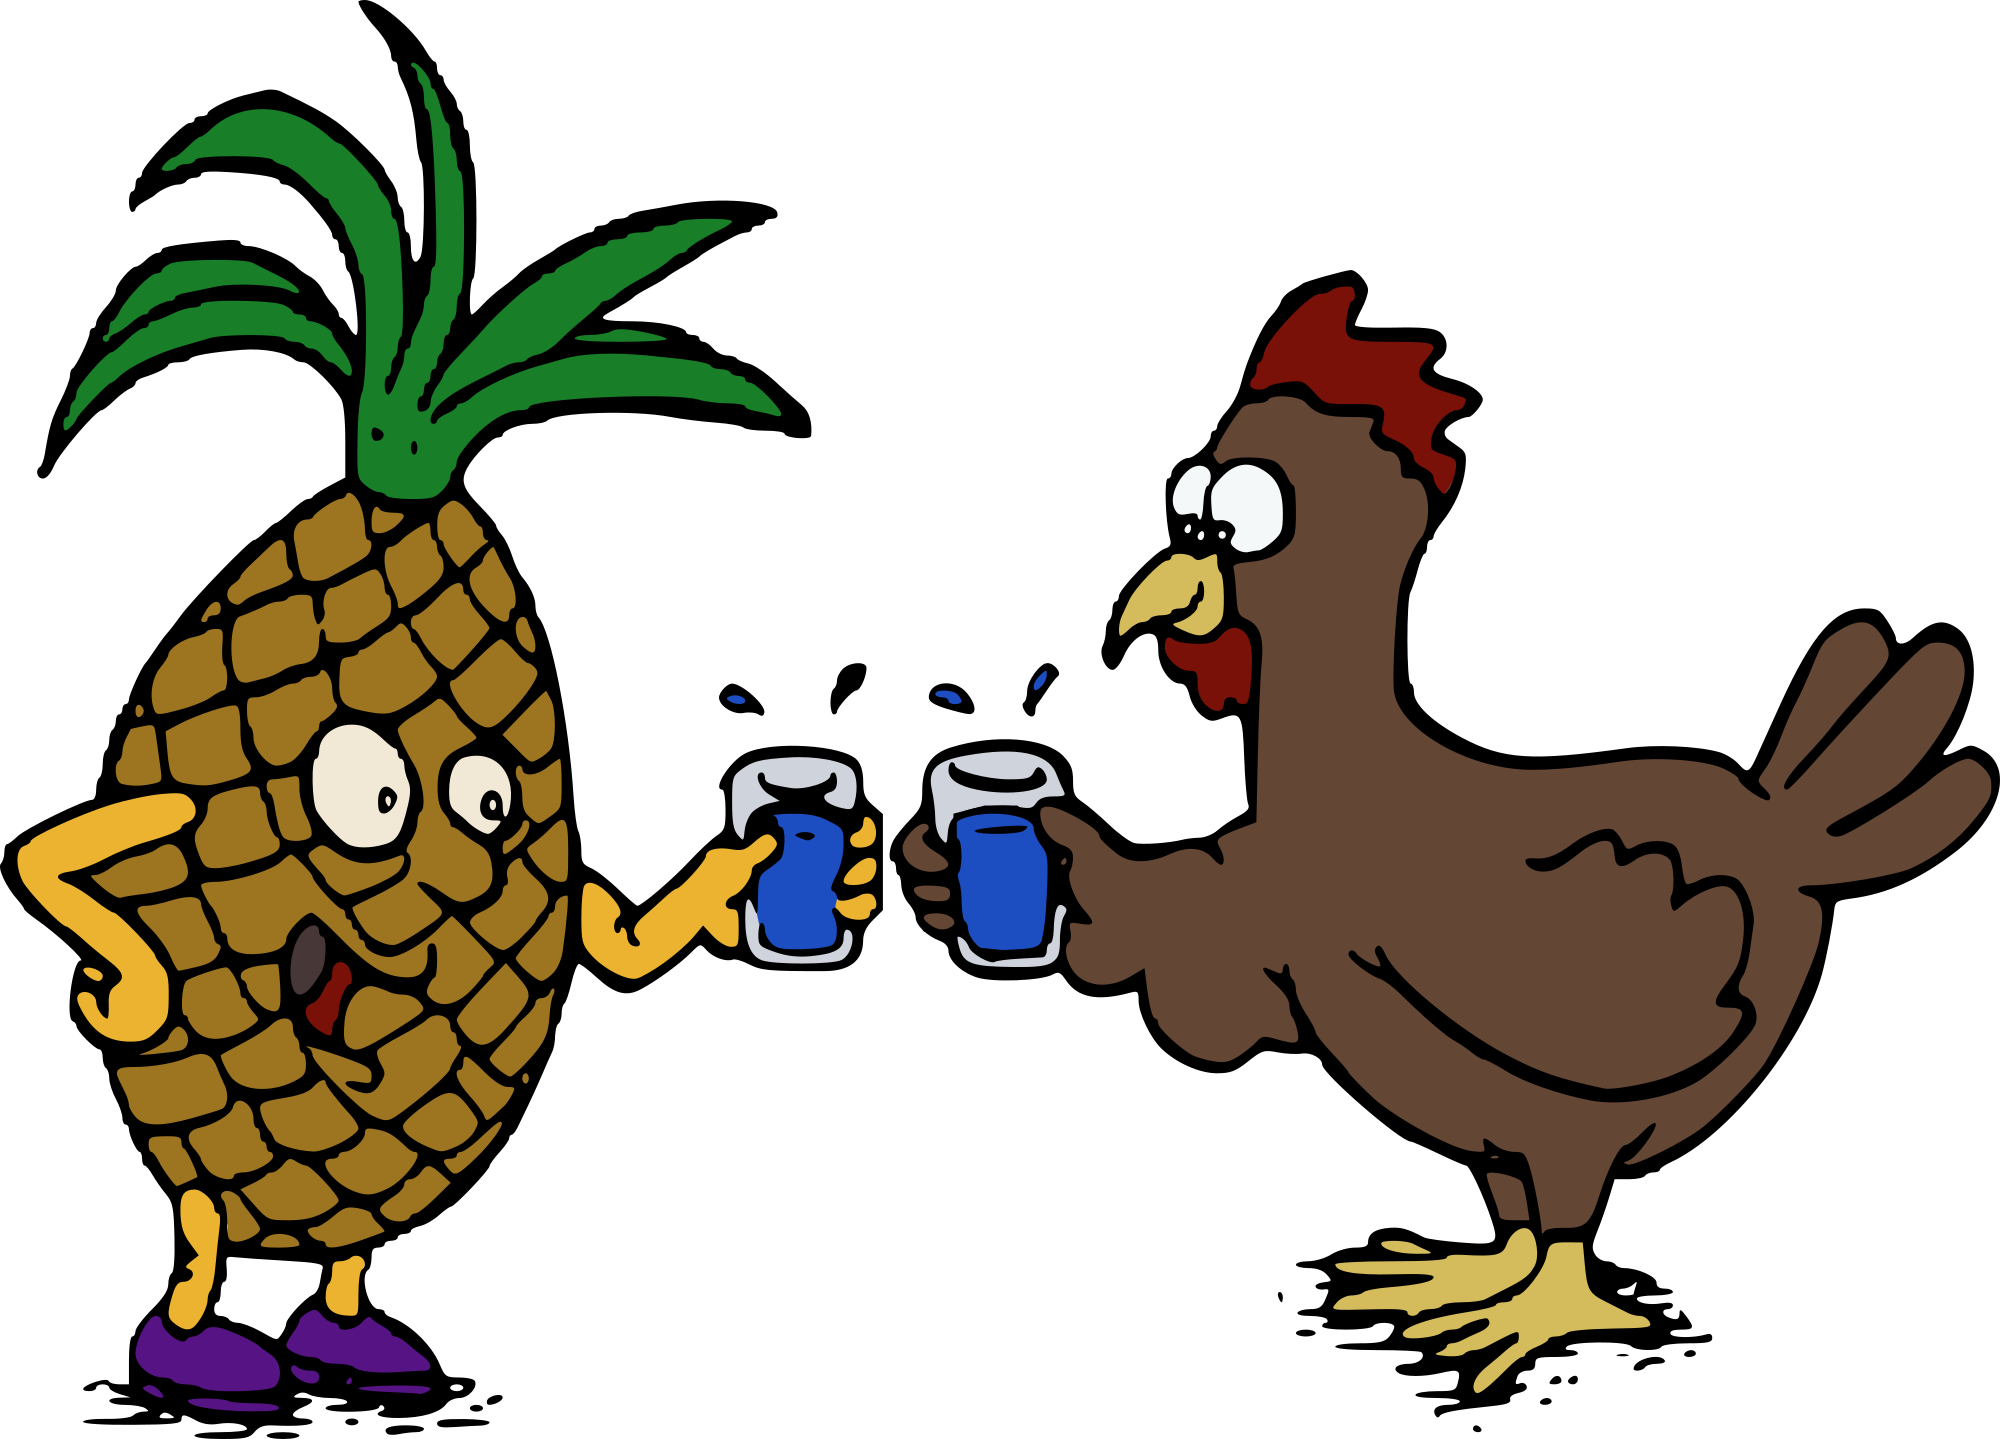 Free pineapple and chicken clipart clipart and vector image.